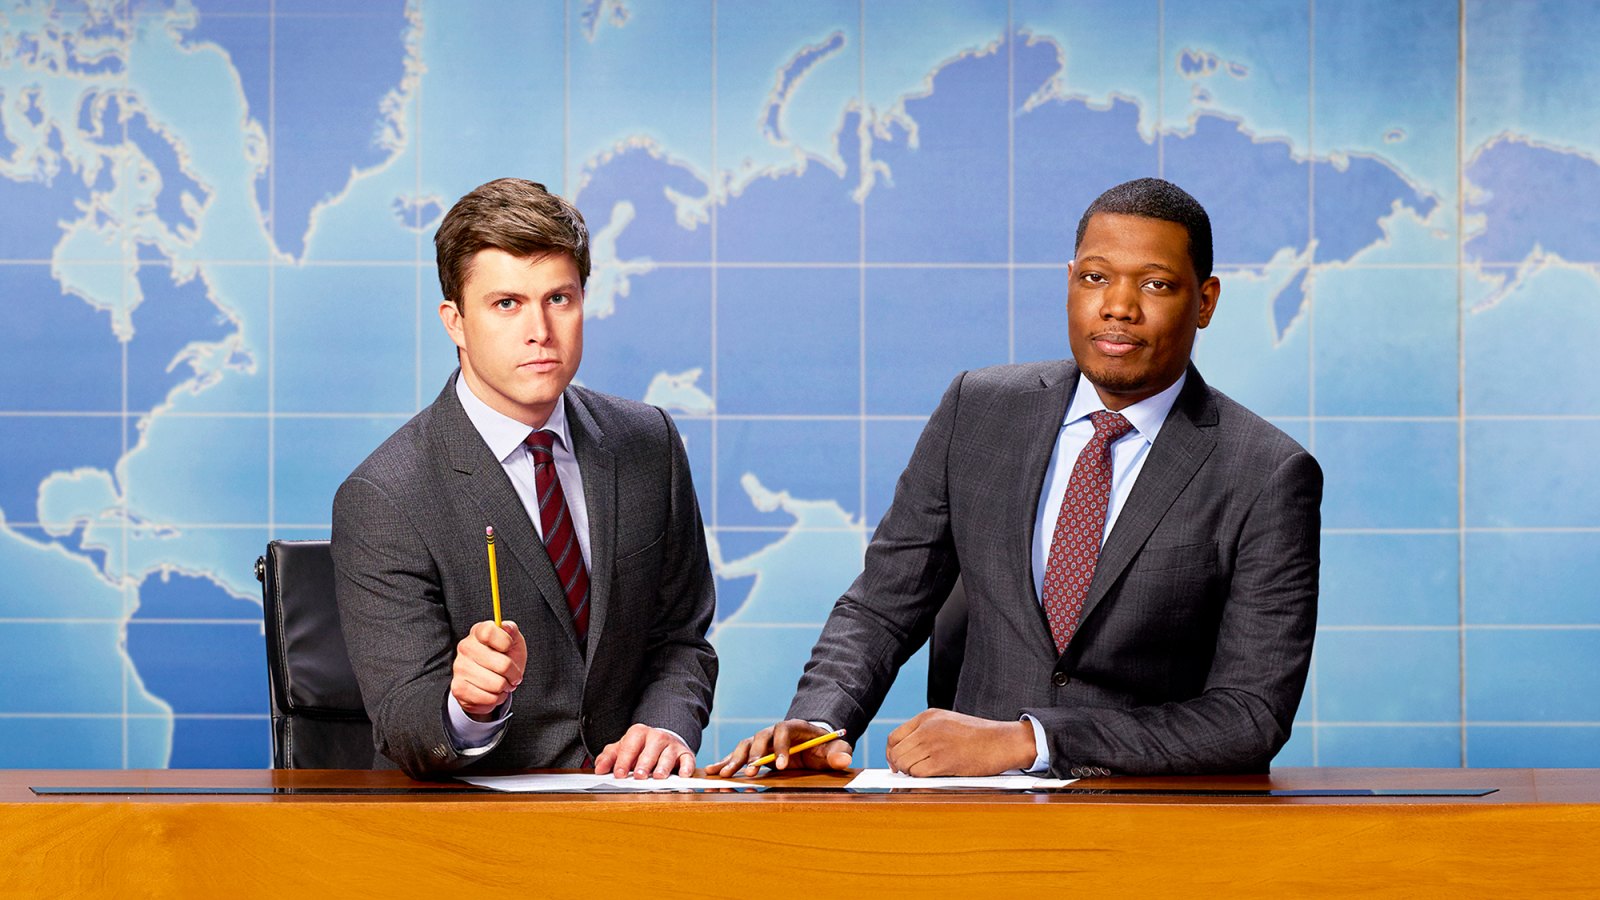 SNL’s ‘Weekend Update’ Anchors Colin Jost and Michael Che